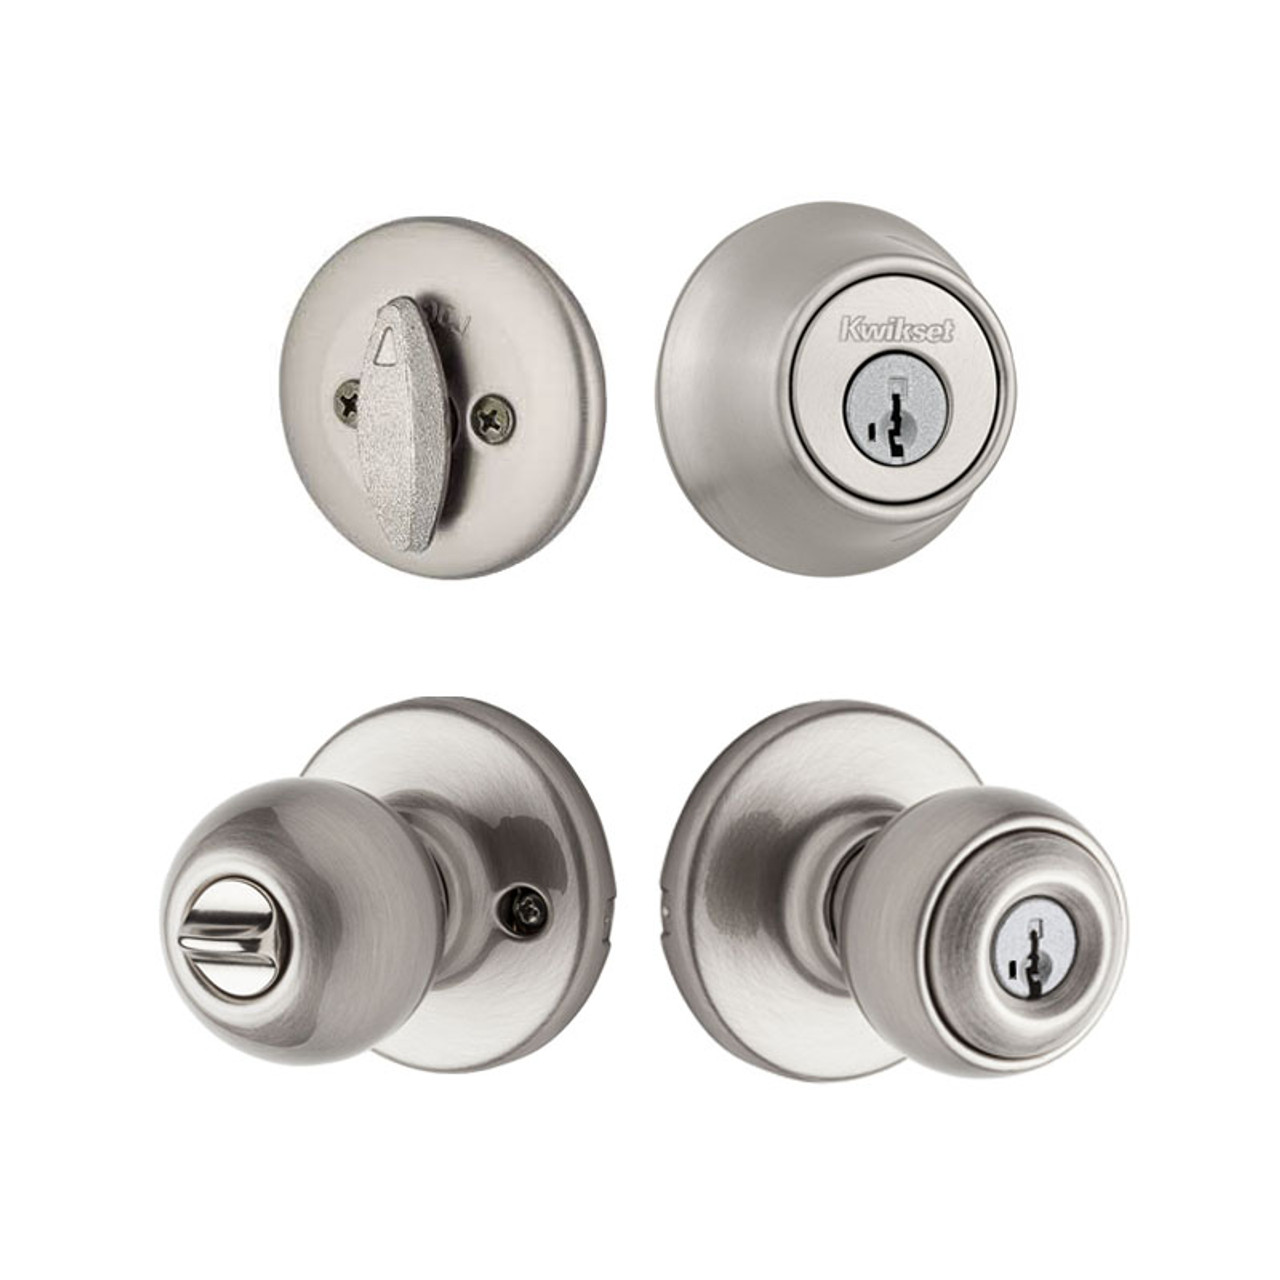 Kwikset Polo Knob and Single Cylinder Deadbolt Combo Pack Keyed